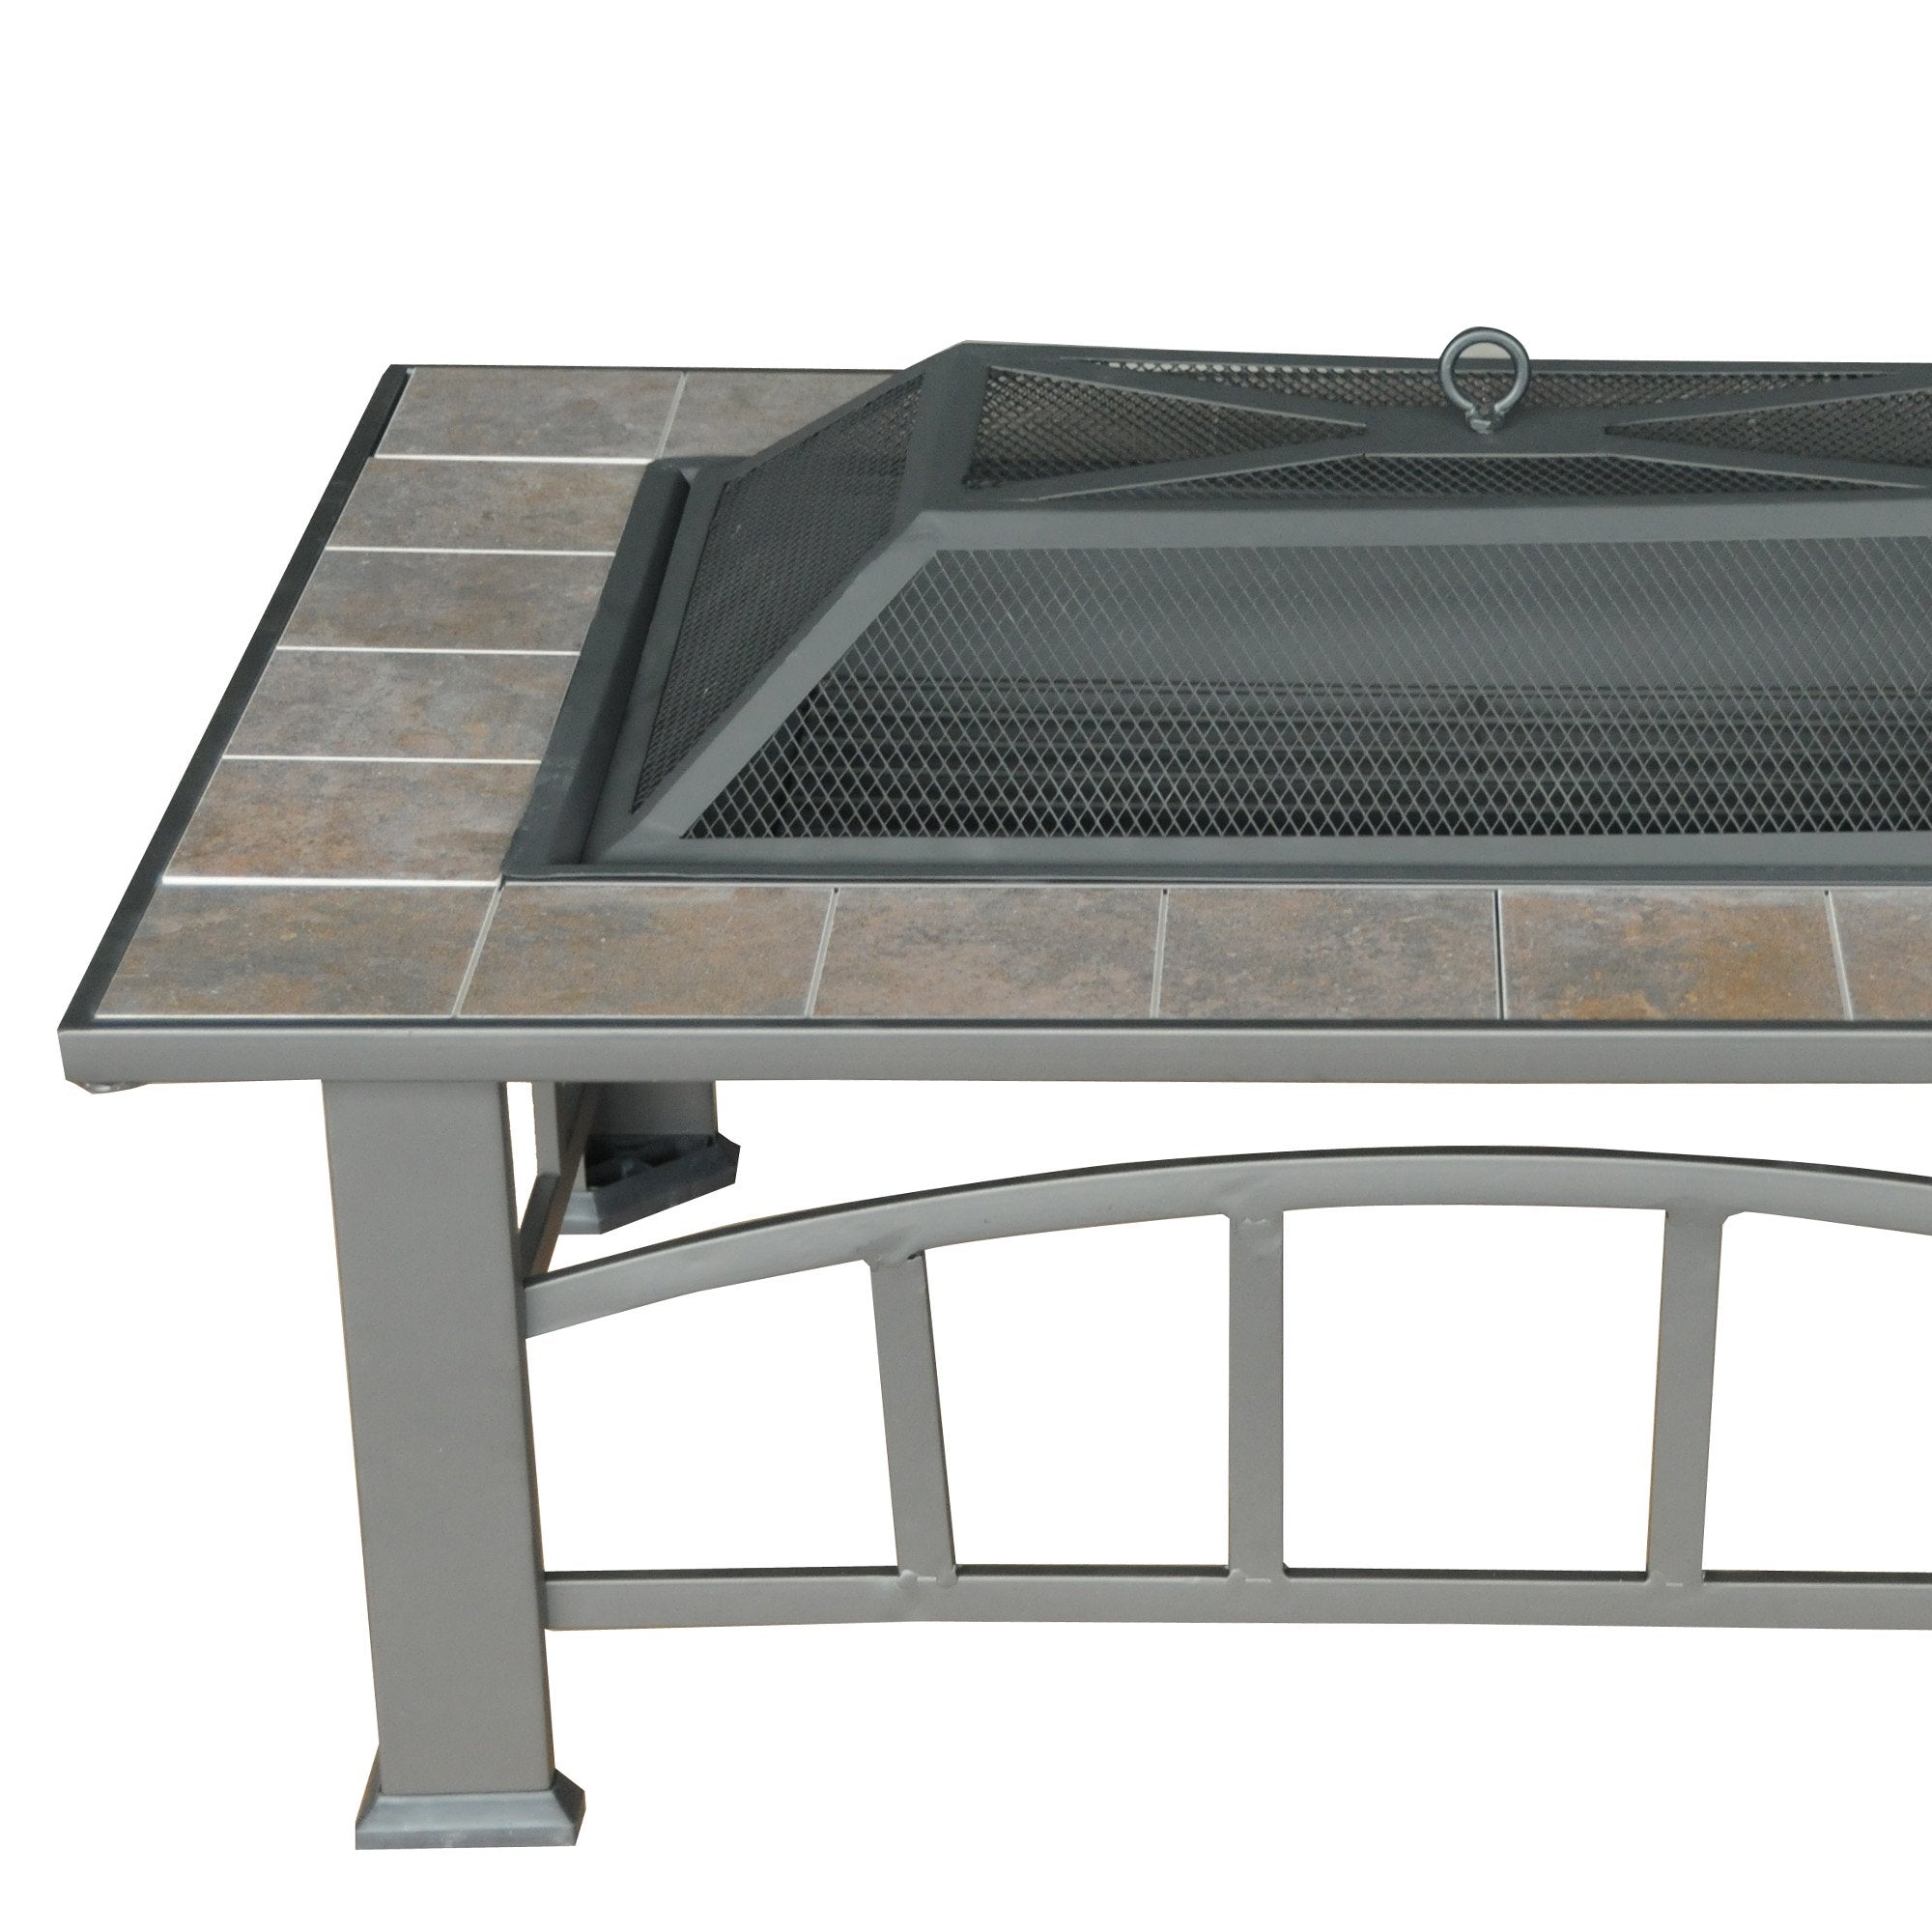 Rectangular Tile Table Top Outdoor Fire Pit Fireplace Backyard Deck Fire Bowl-Fire Pits-AULEY